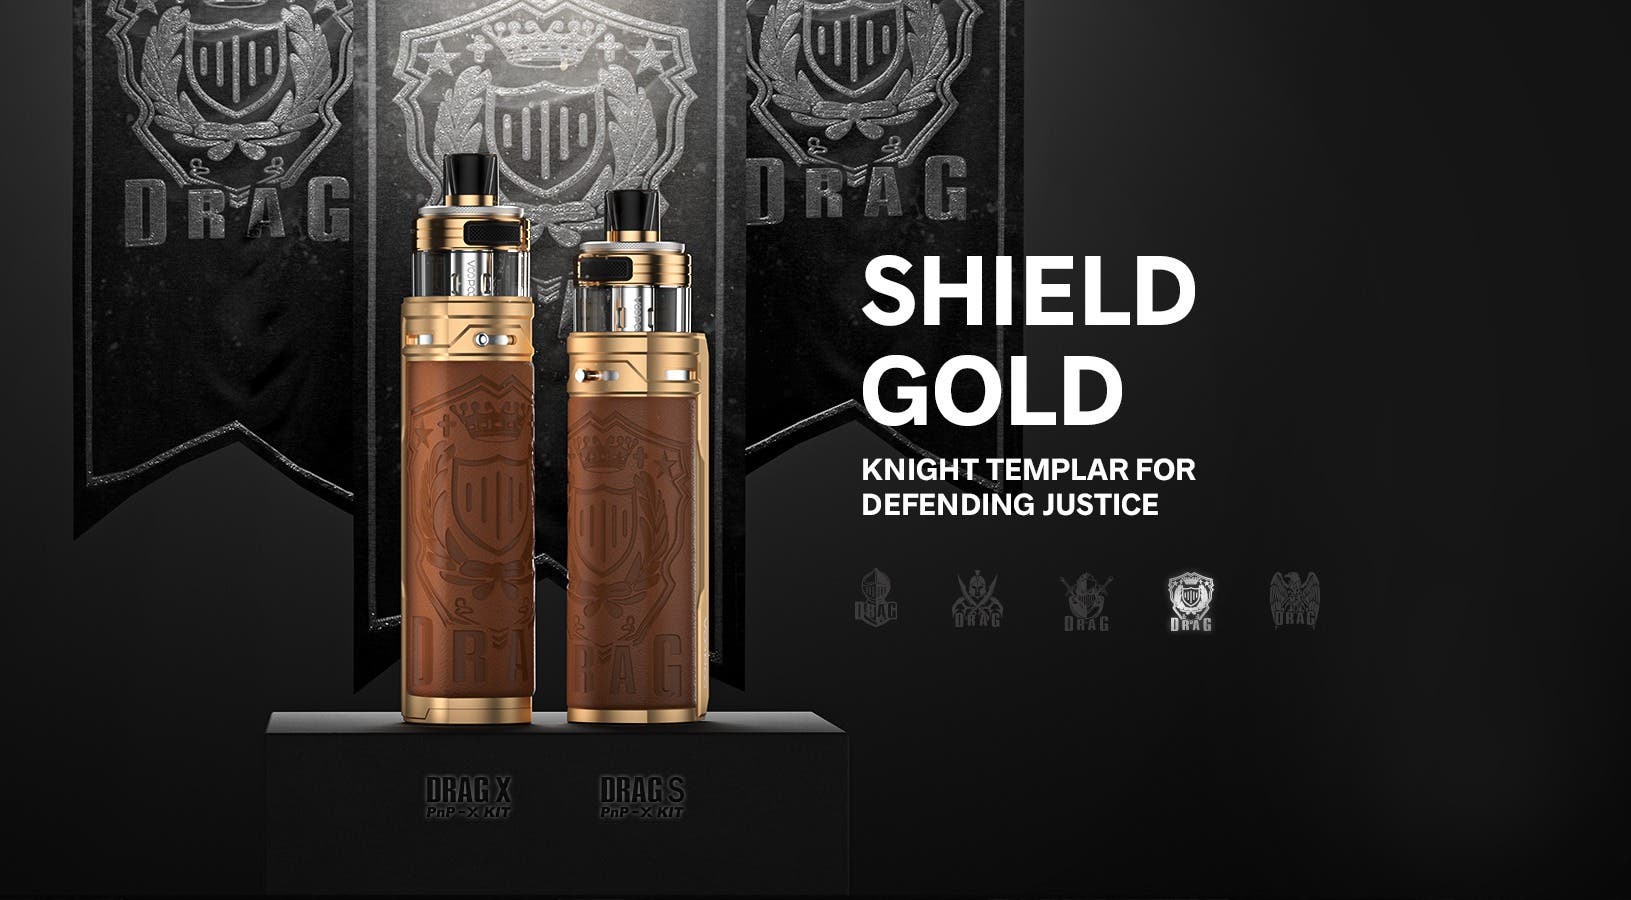 The Drag S PnP-X Pod kit is available in Shield Gold.